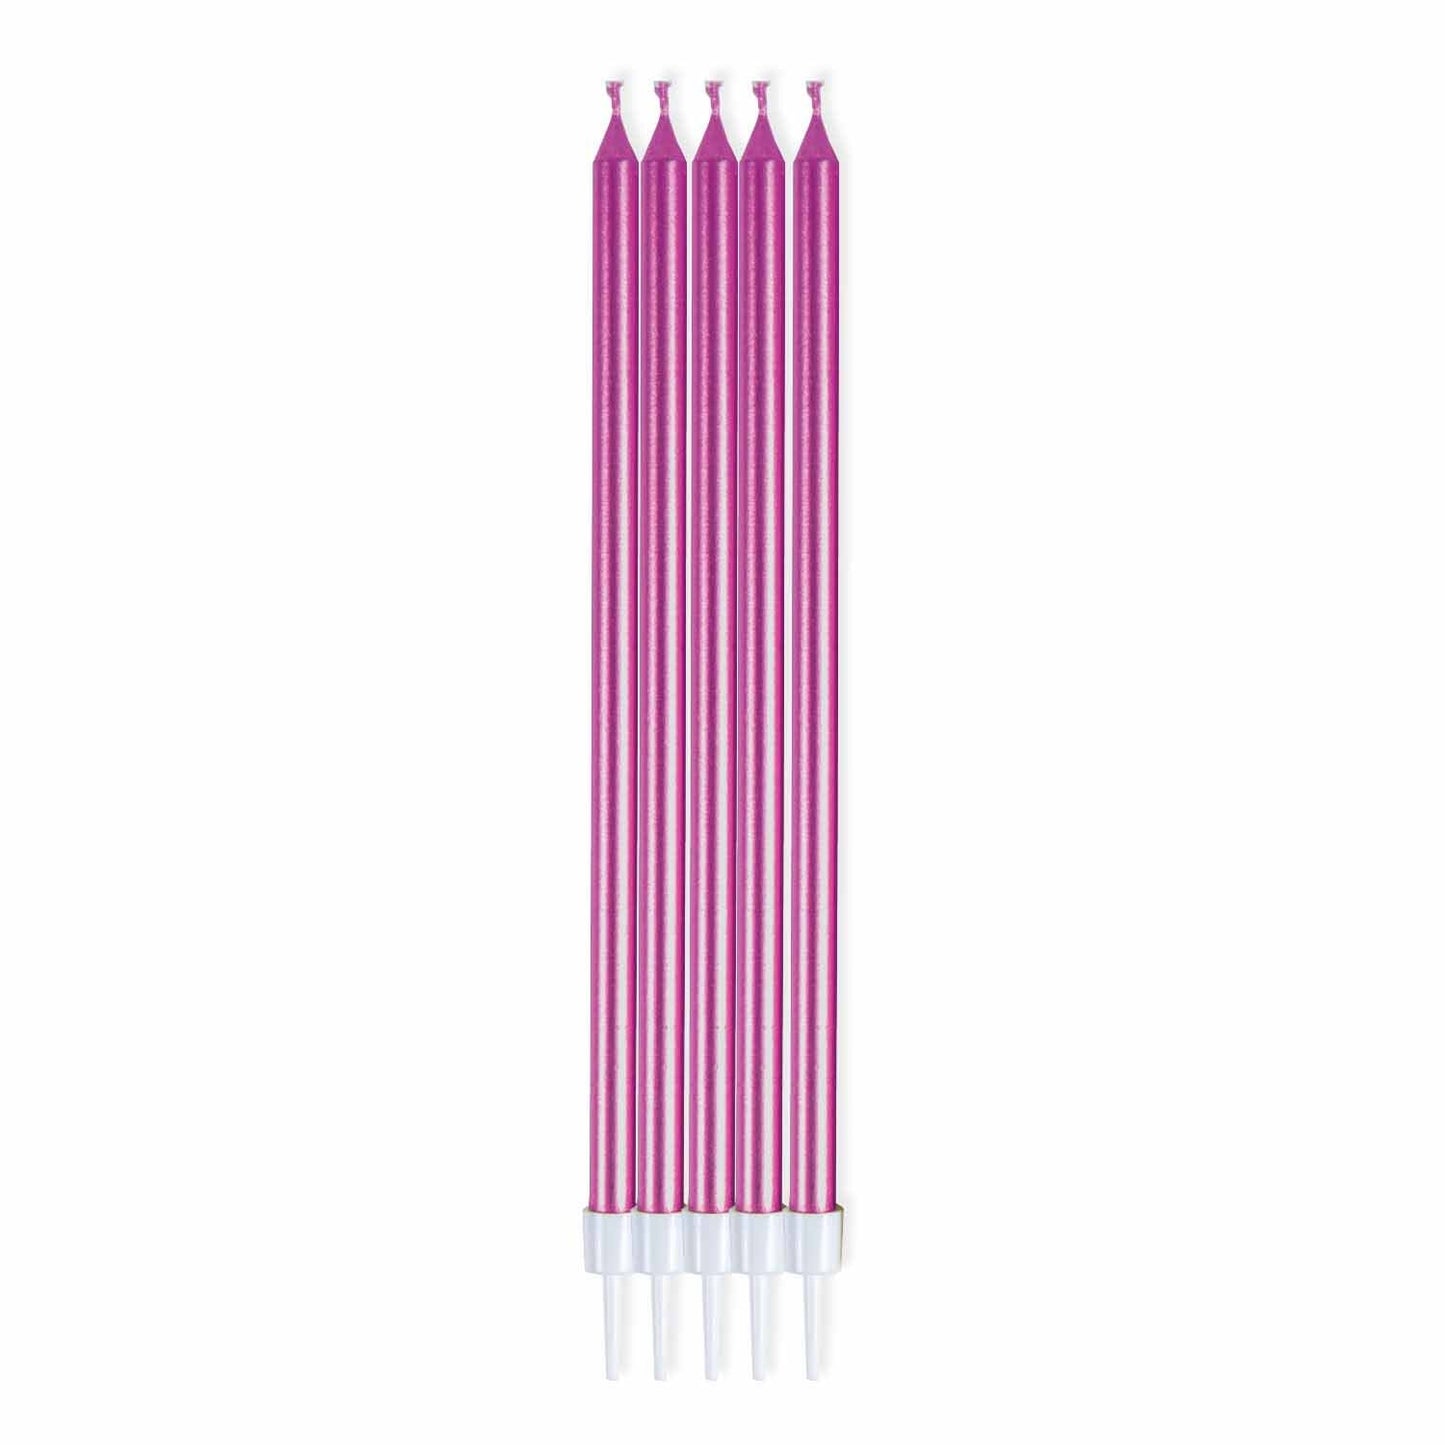 16cm Metallic Pink Candles, Pack of 12